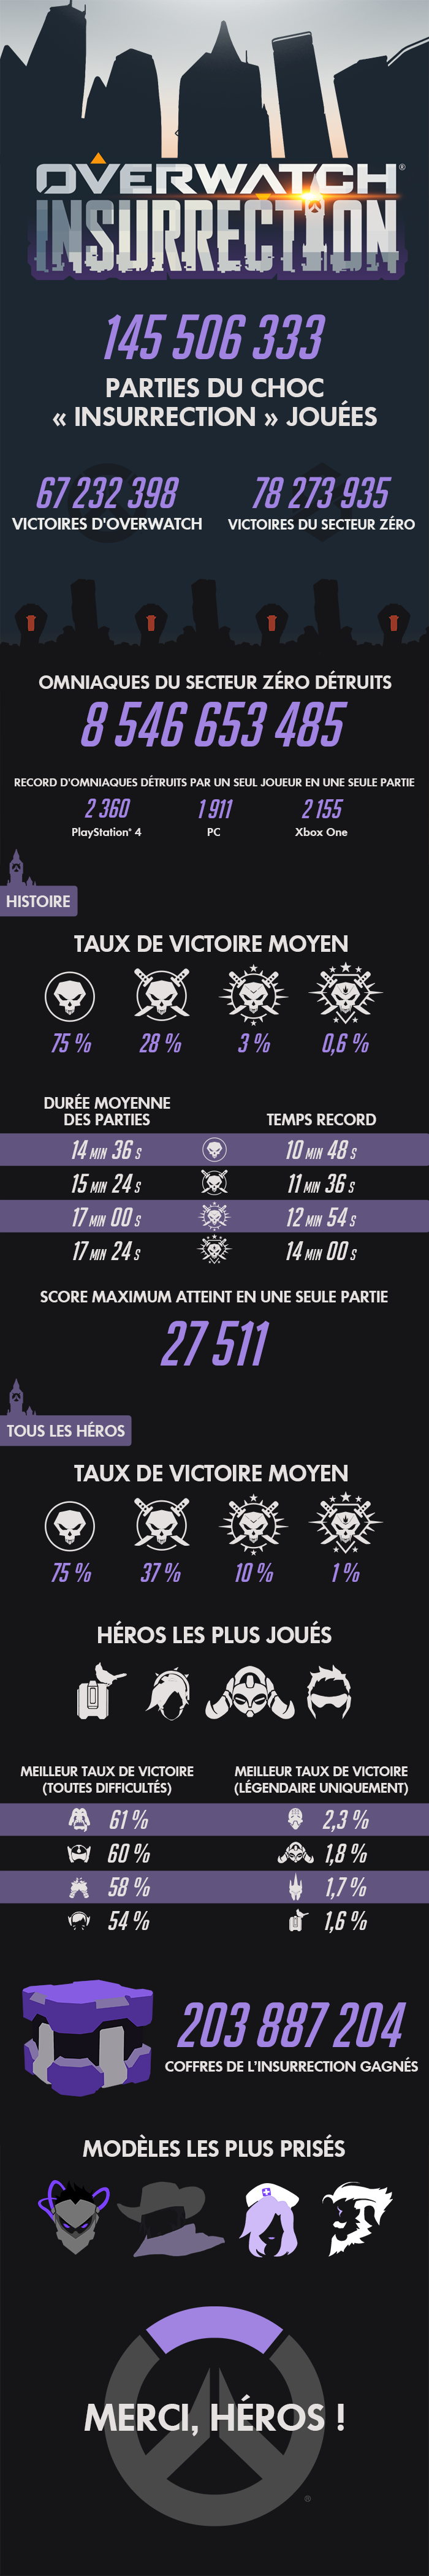 Infographie insurrection overwatch